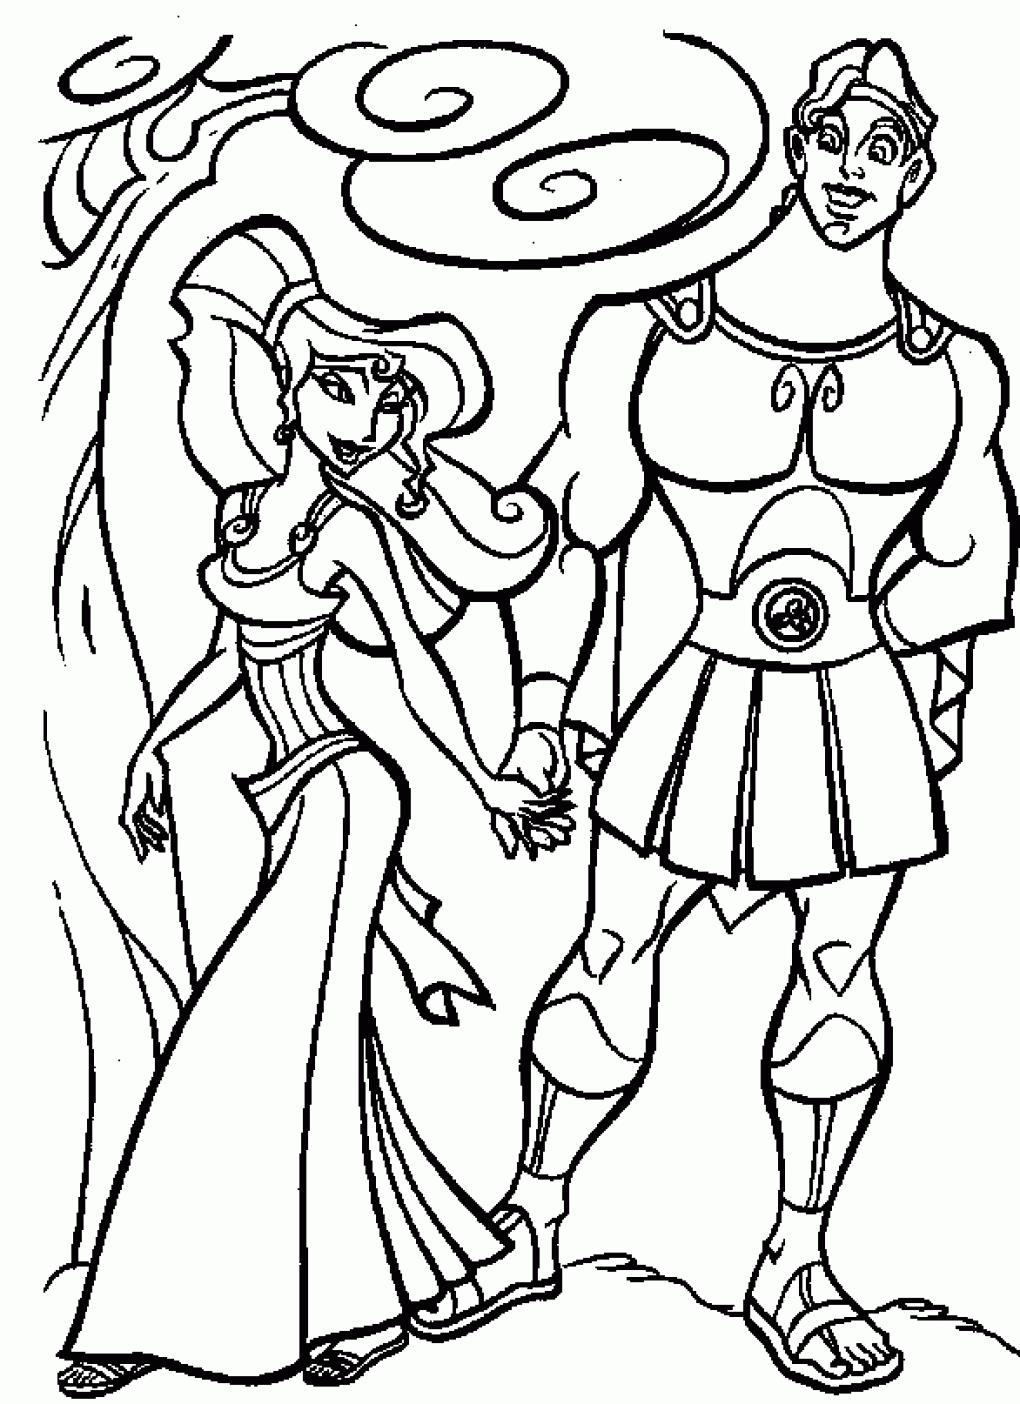 Free Hercules coloring pages to print for kids Download print and color